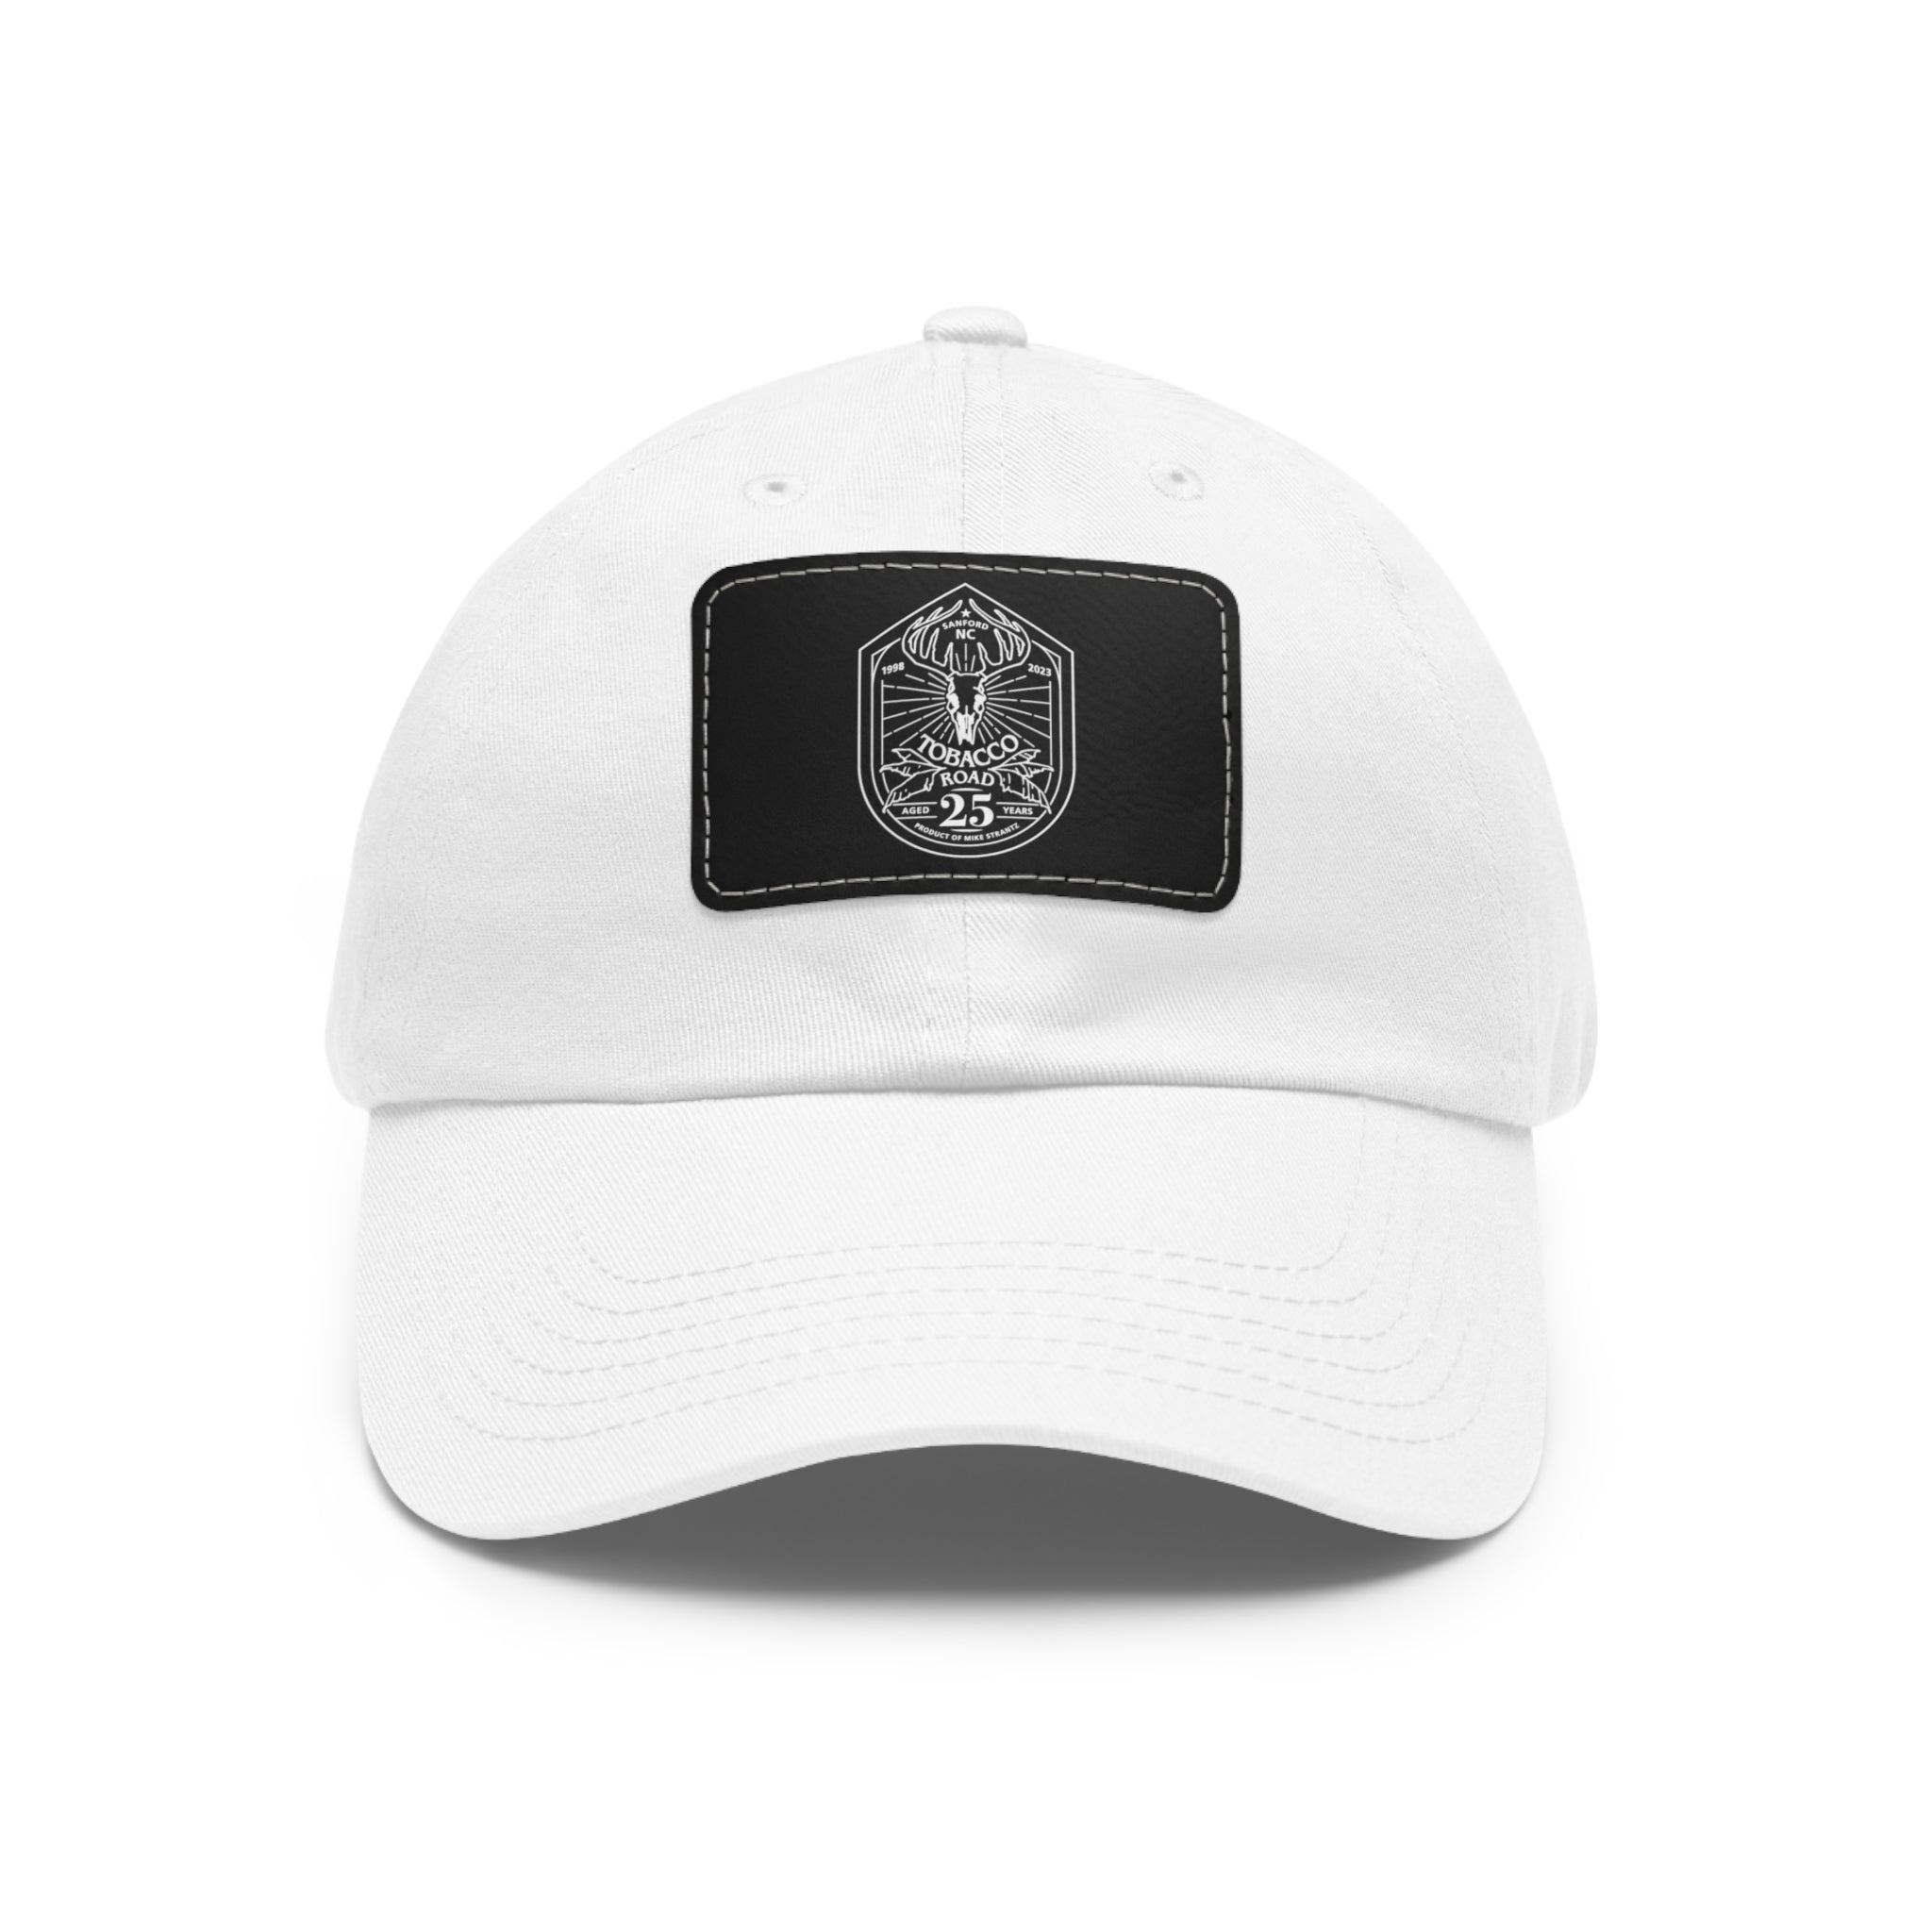 Limited Edition 25th Anniversary Hat with Leather Patch